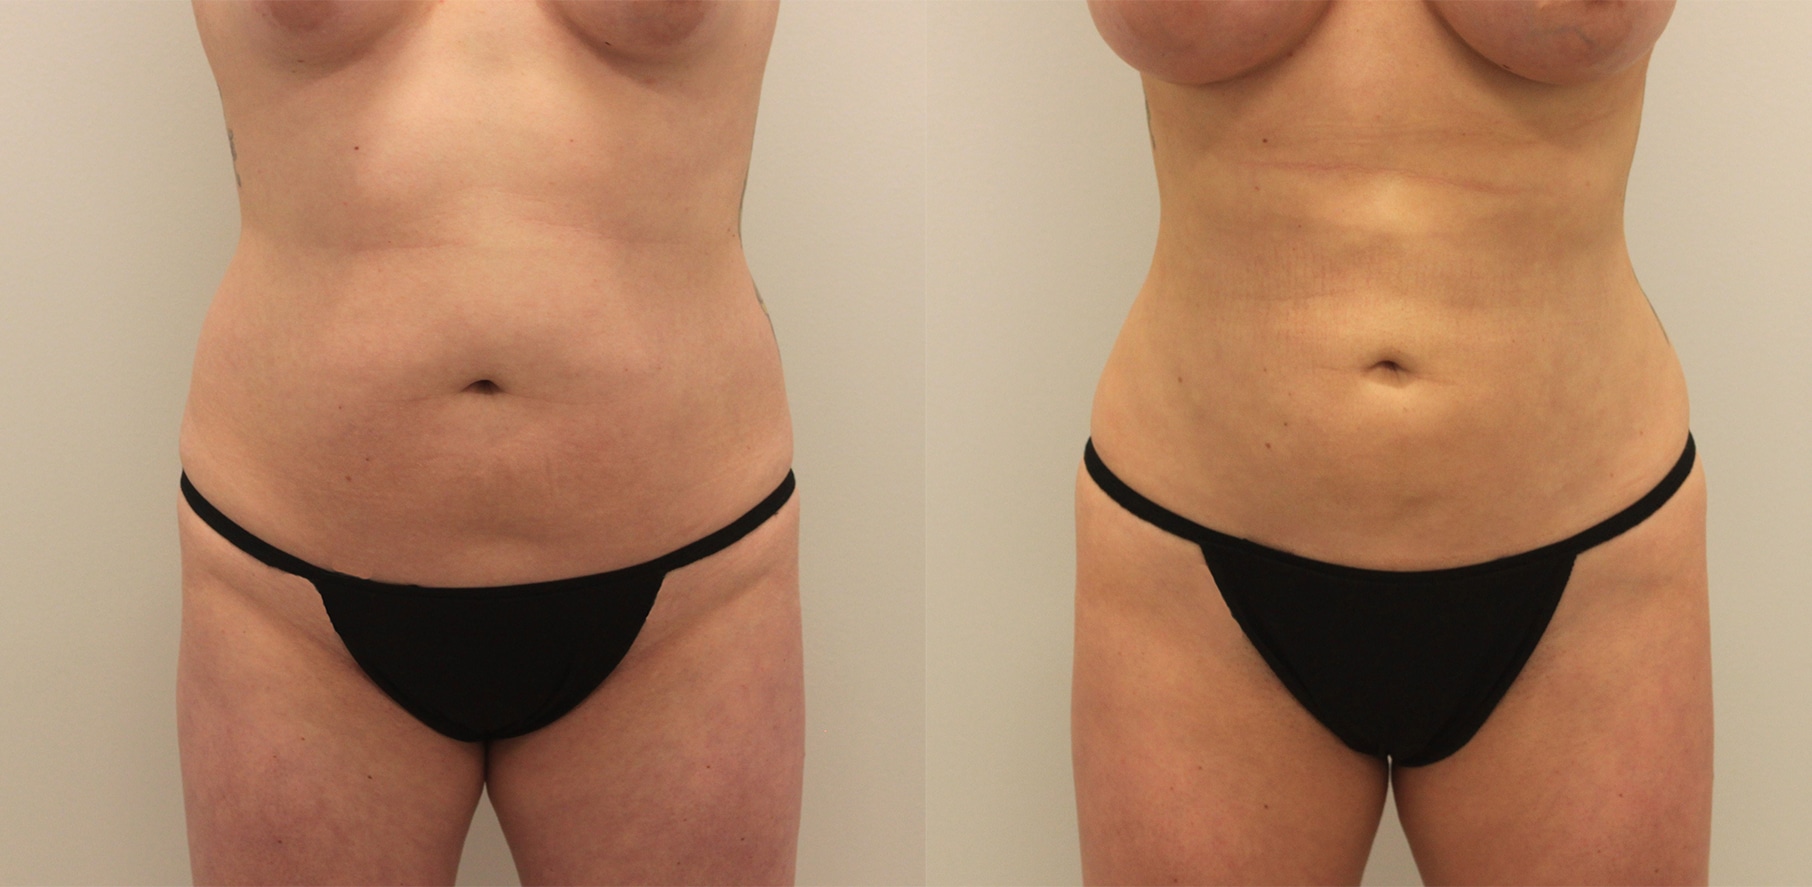 topless female patient before and after bodytite, stomach flatter after procedure